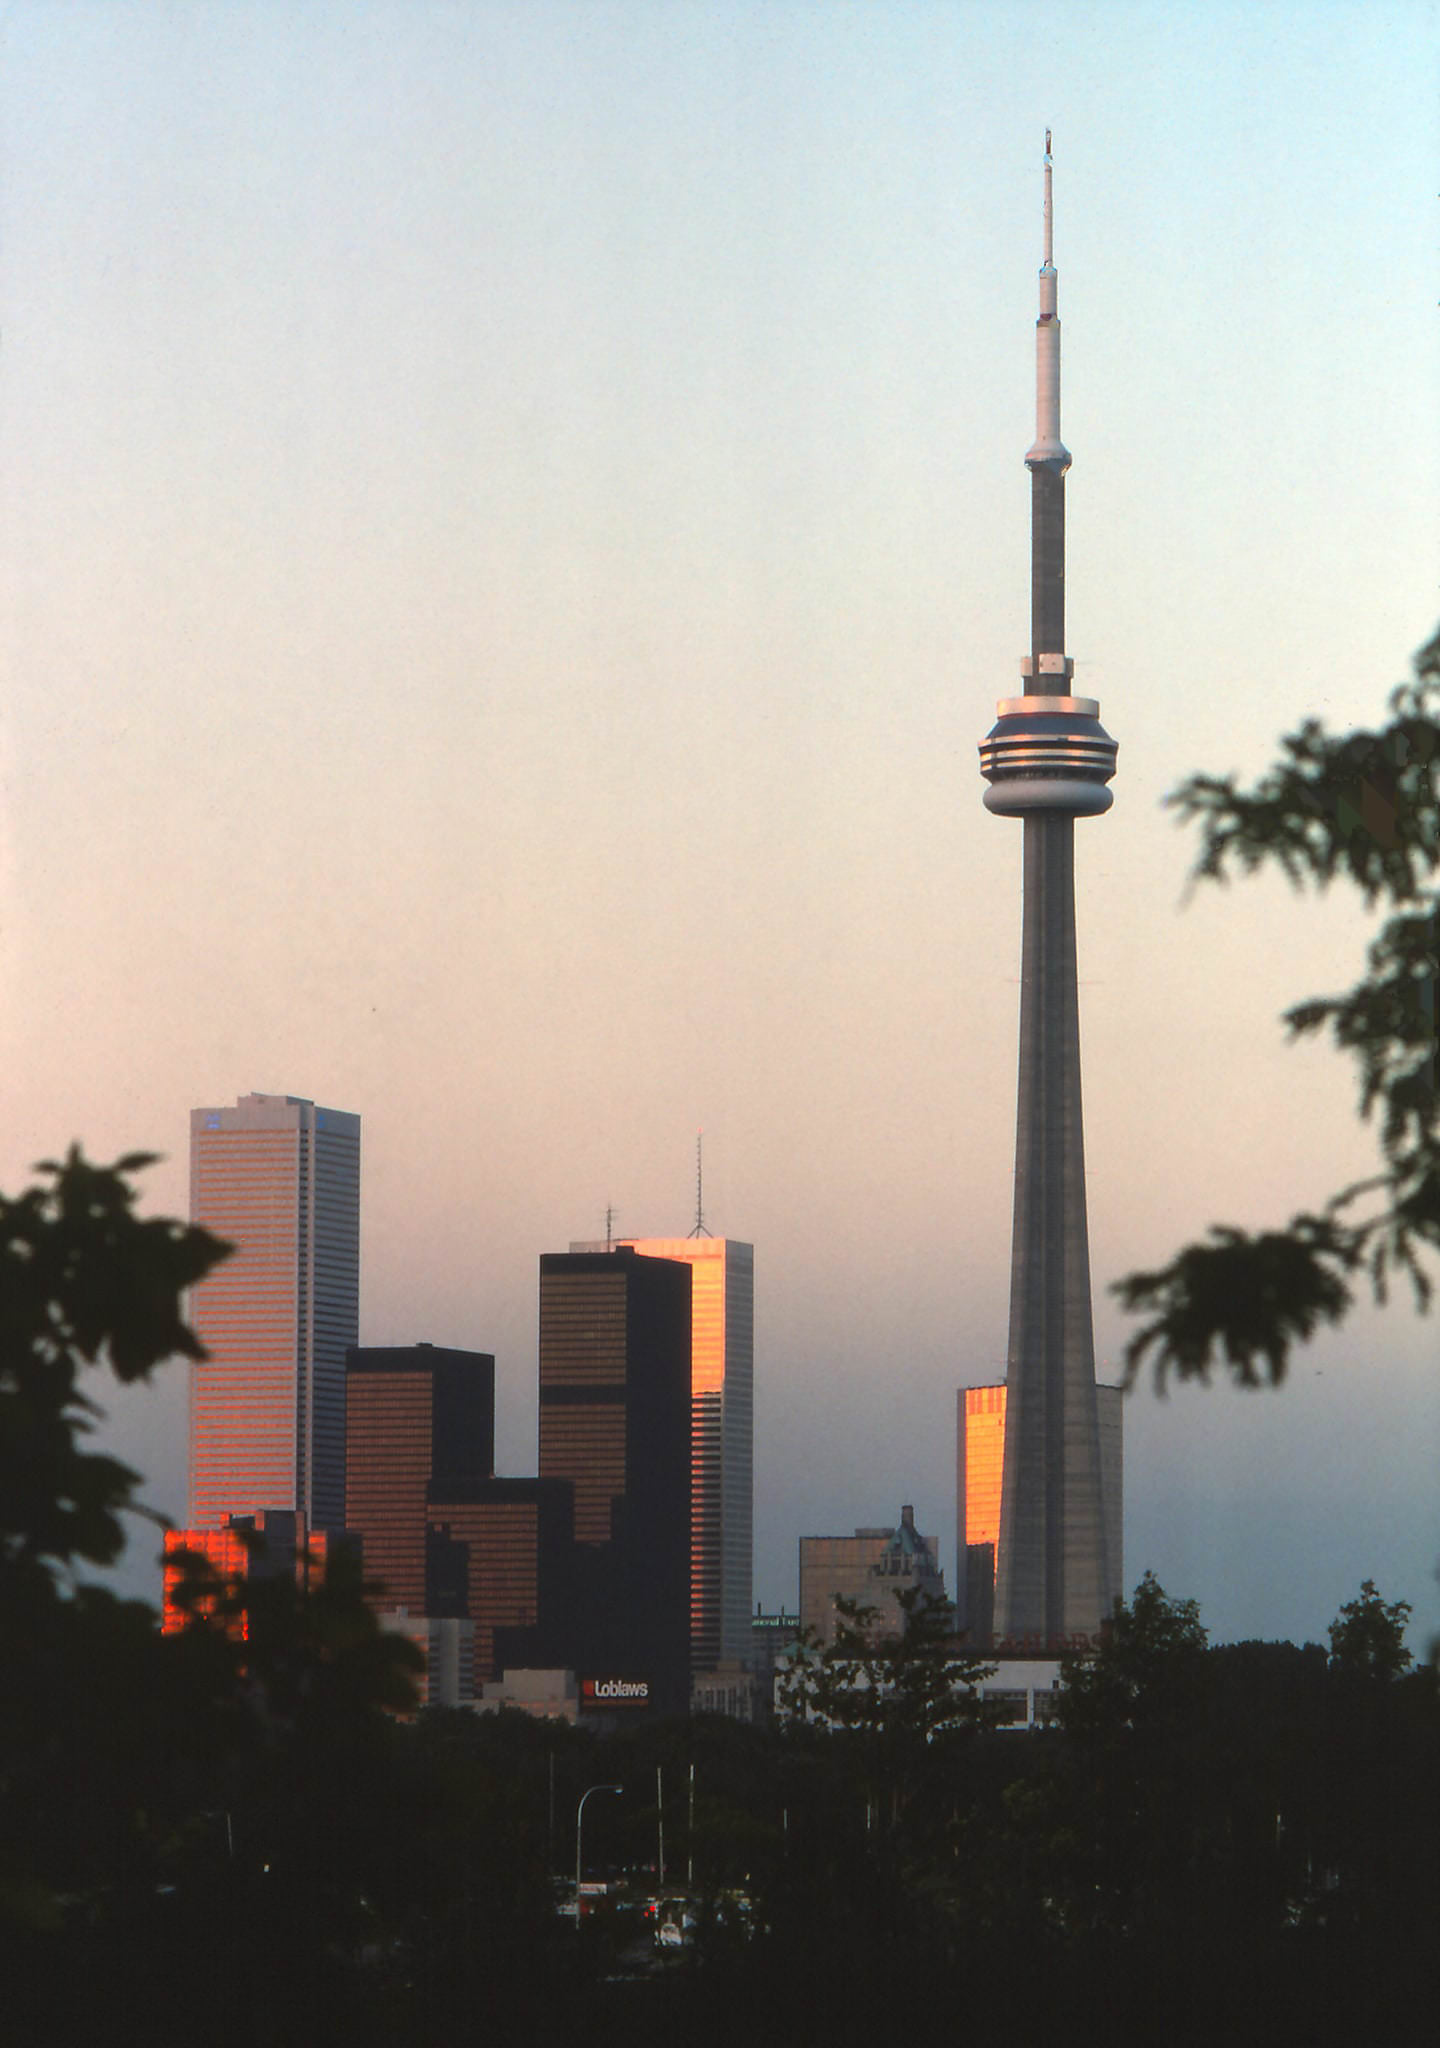 Uncluttered Toronto Skyline from Ontario Place, 1970s.